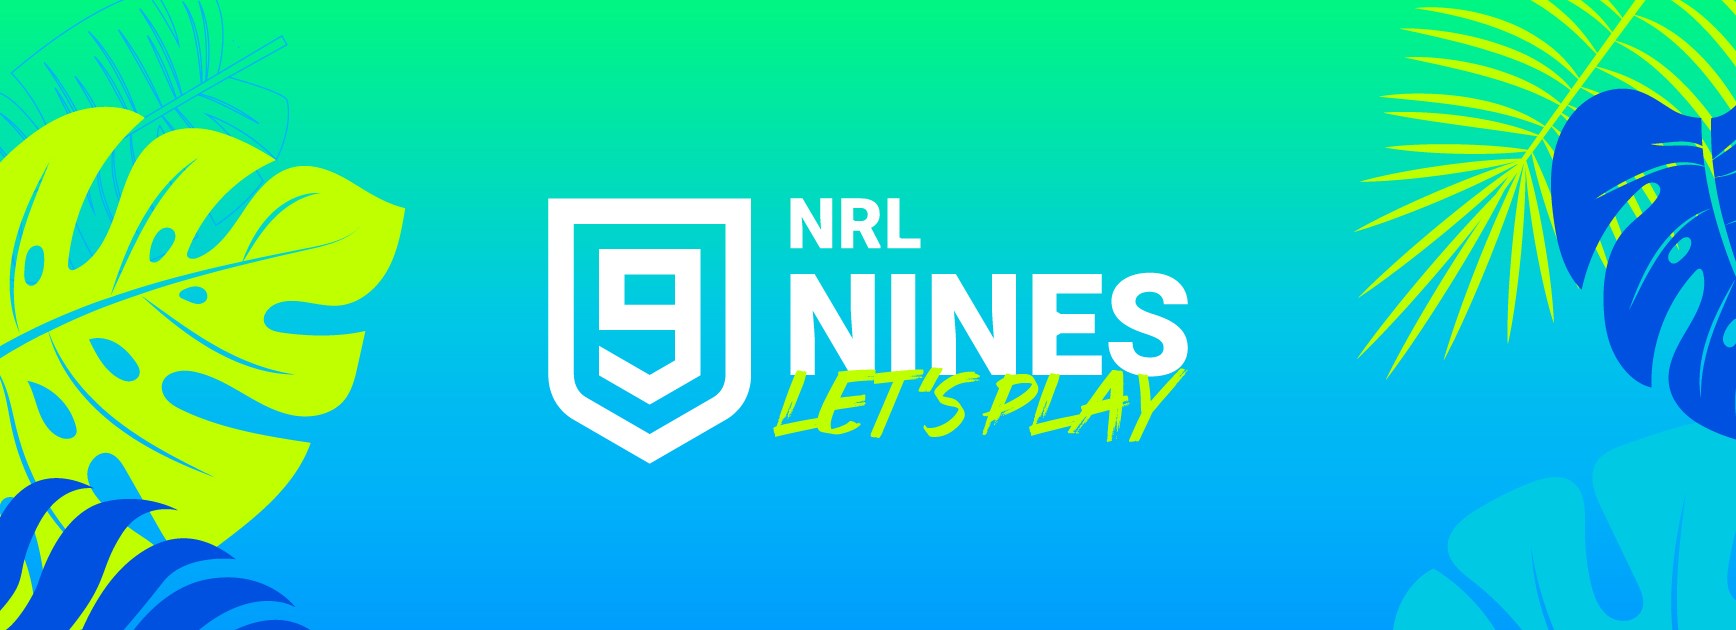 NRL Nines day one: How it all unfolded